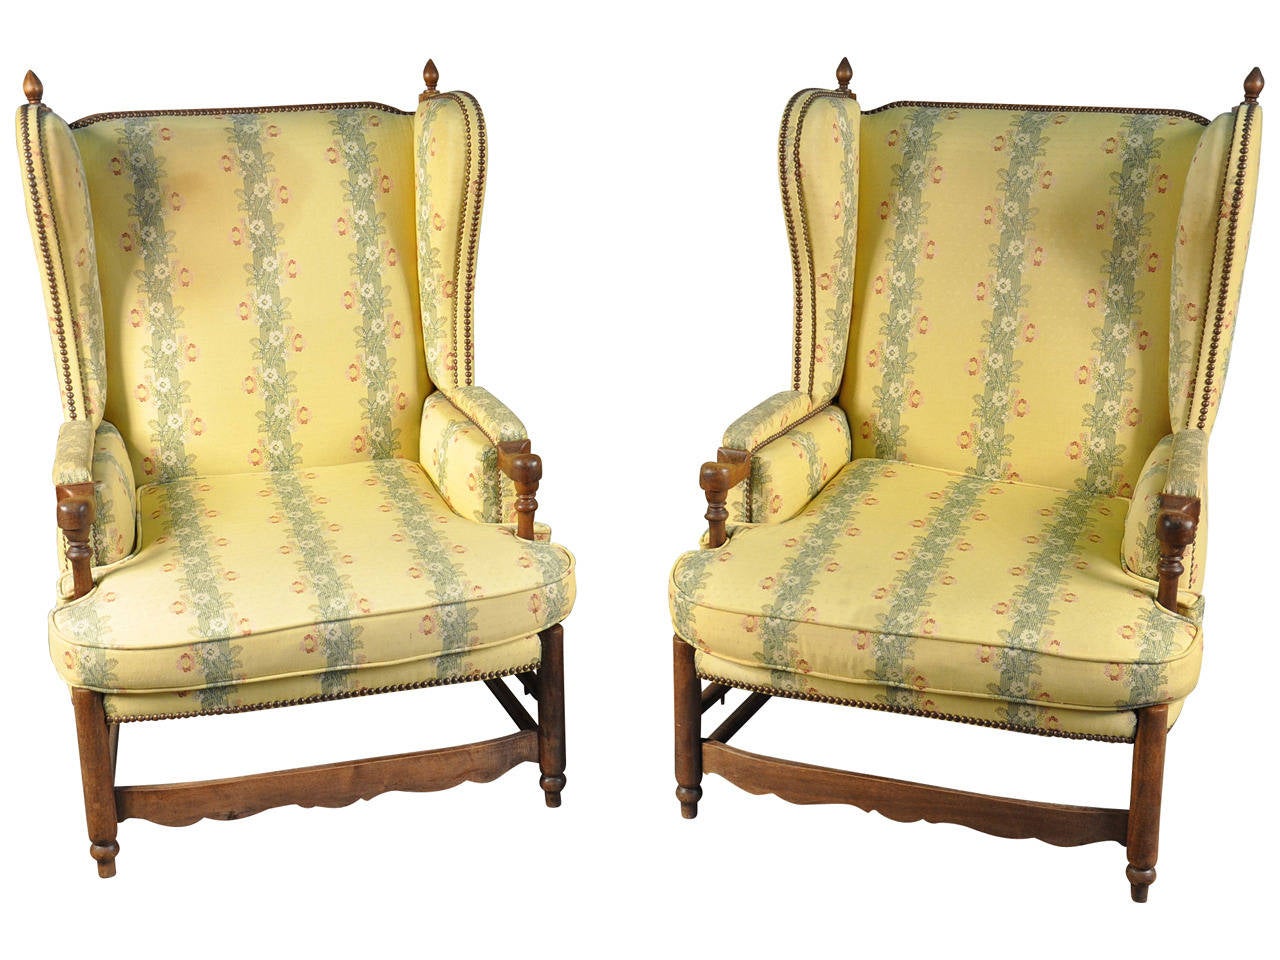 A charming pair of French Provencal armchairs in walnut.  These wingbacked armchairs are beautifully constructed with ladder backs and sculpted stretchers.